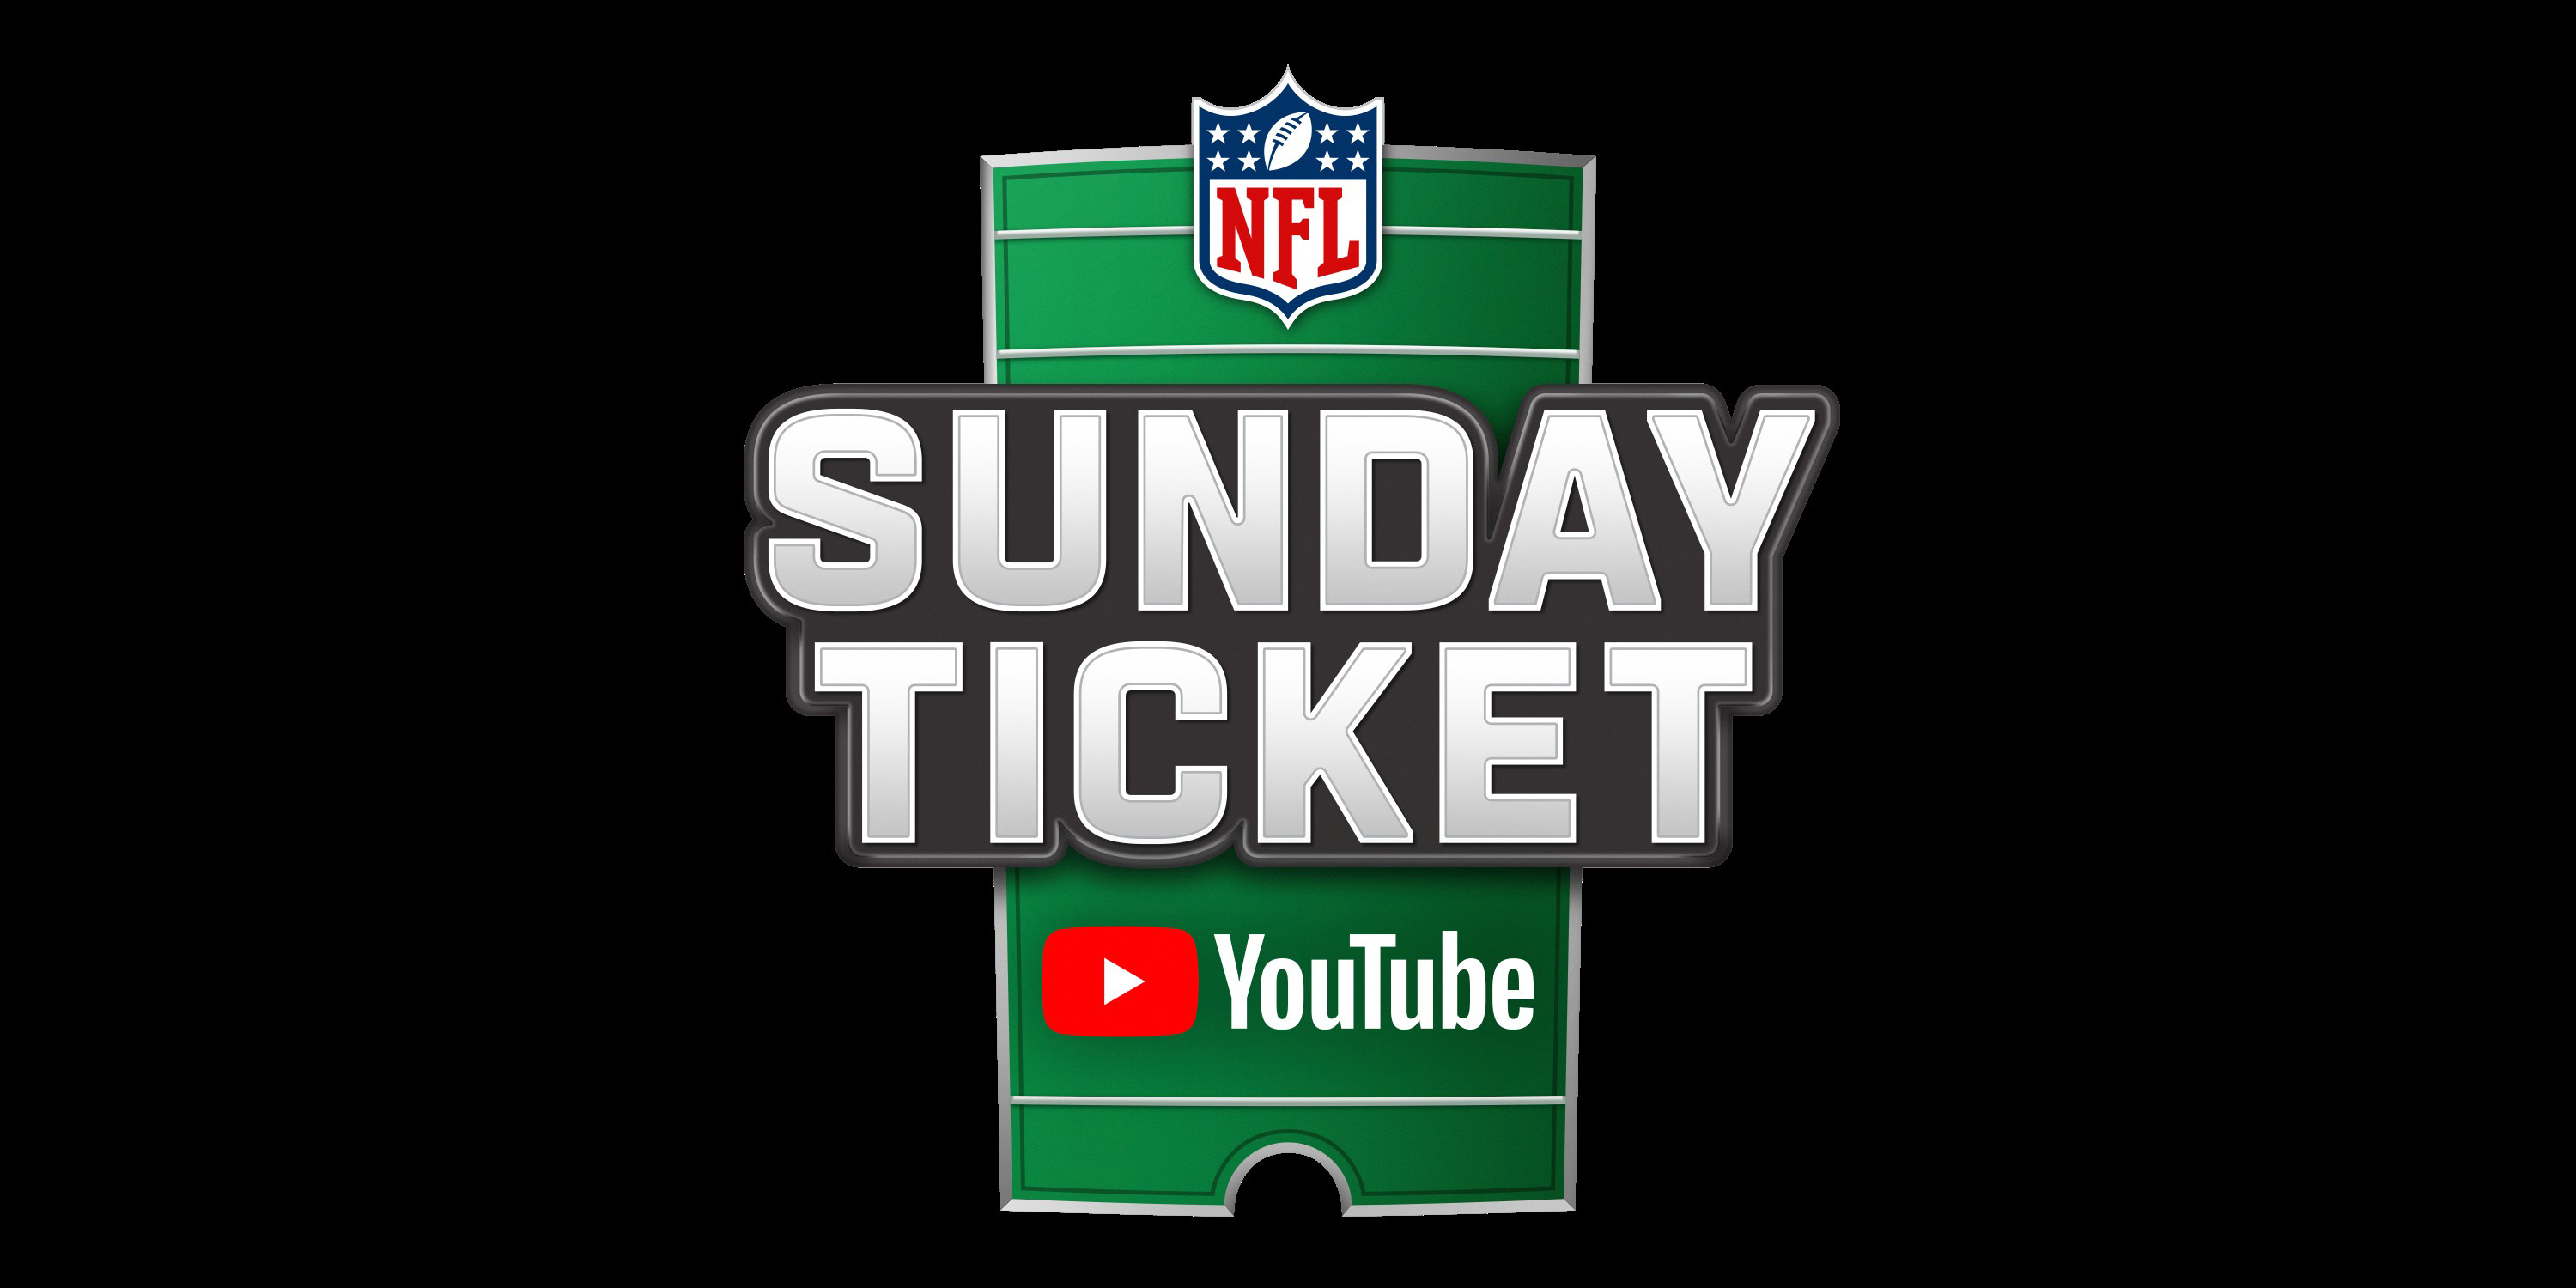 NFL Sunday Ticket on YouTube will offer condensed replays